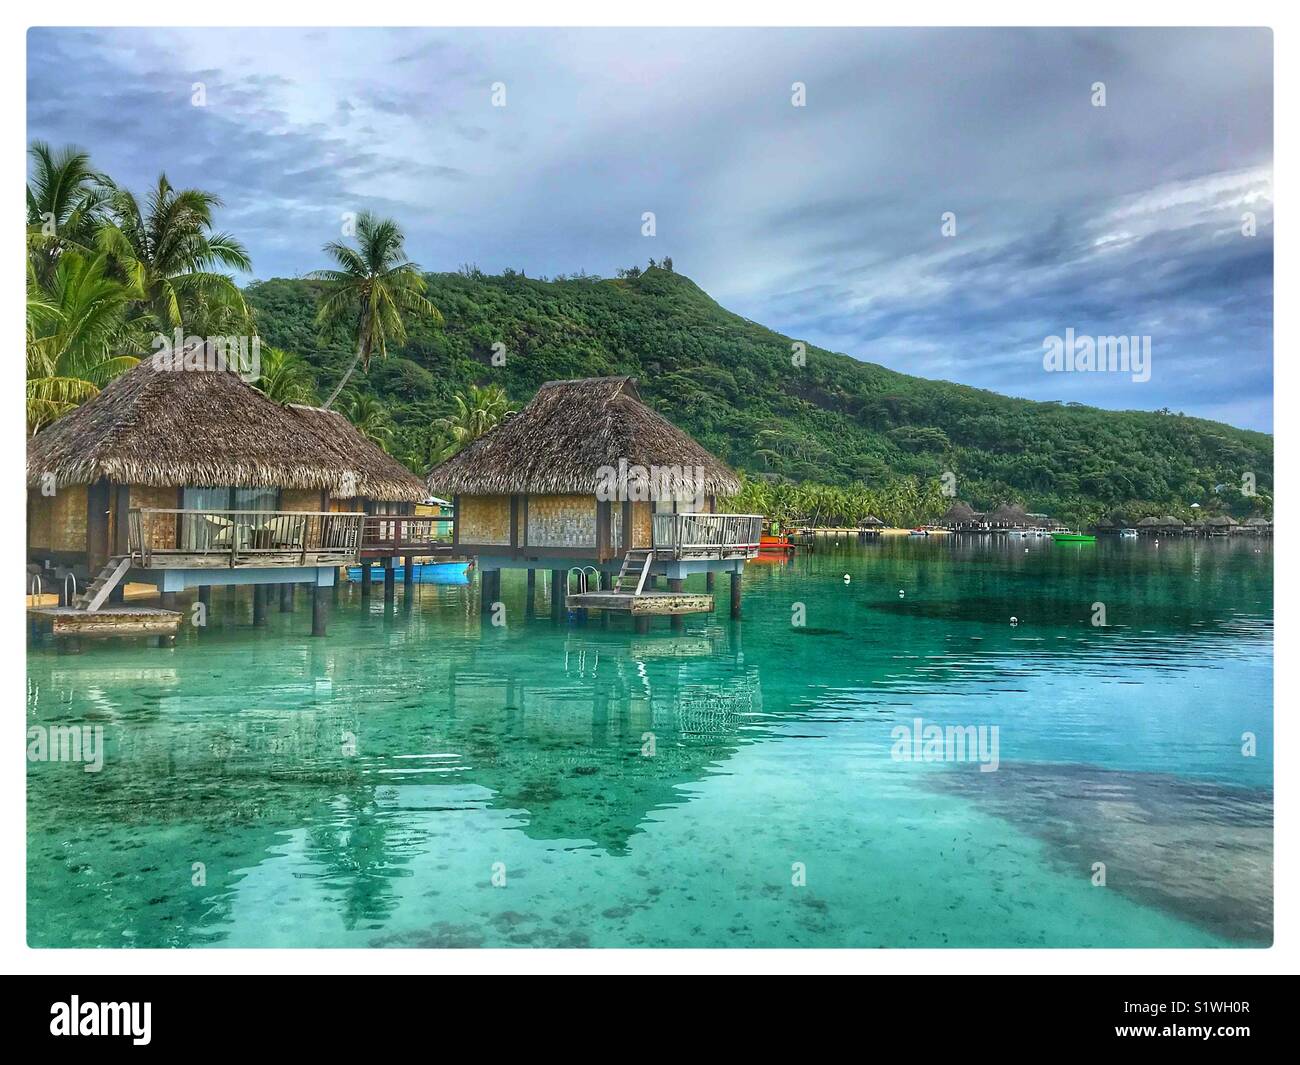 Beautiful picture of the over the water bungalows on the island of Bora-Bora in French Polynesia Stock Photo